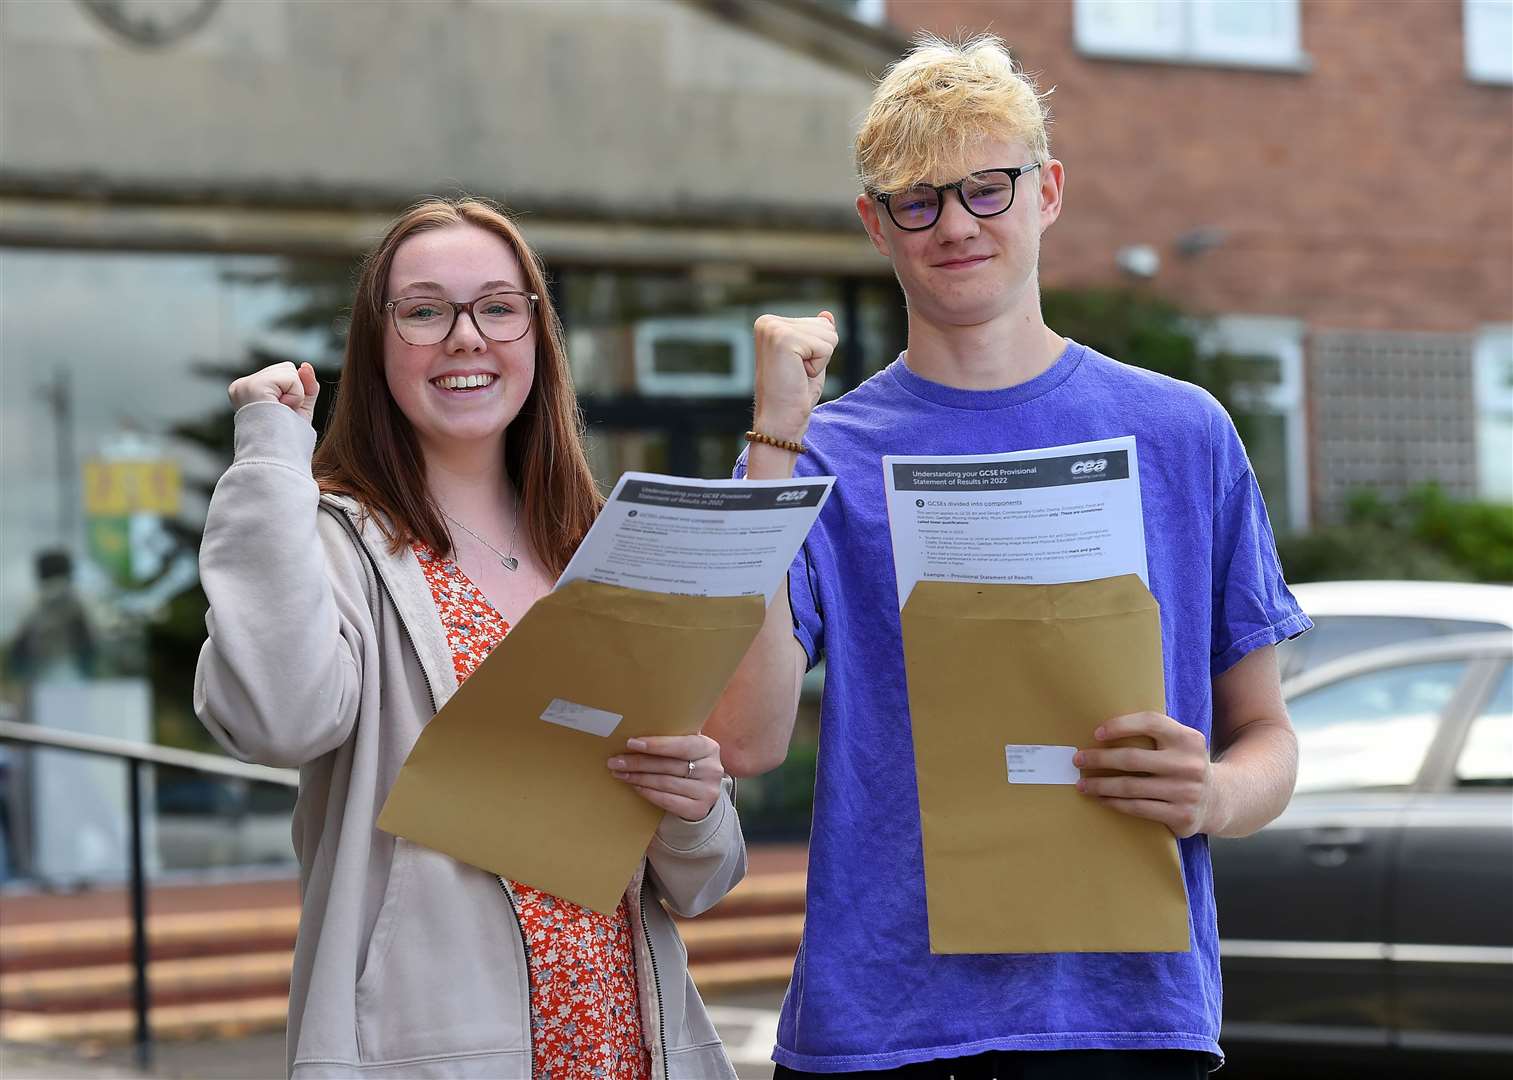 Abi Trainor and Ben Aiken, pupils at Sullivan Upper School in Holywood, Co Down, celebrate after receiving their GCSE results (Oliver McVeigh/PA)